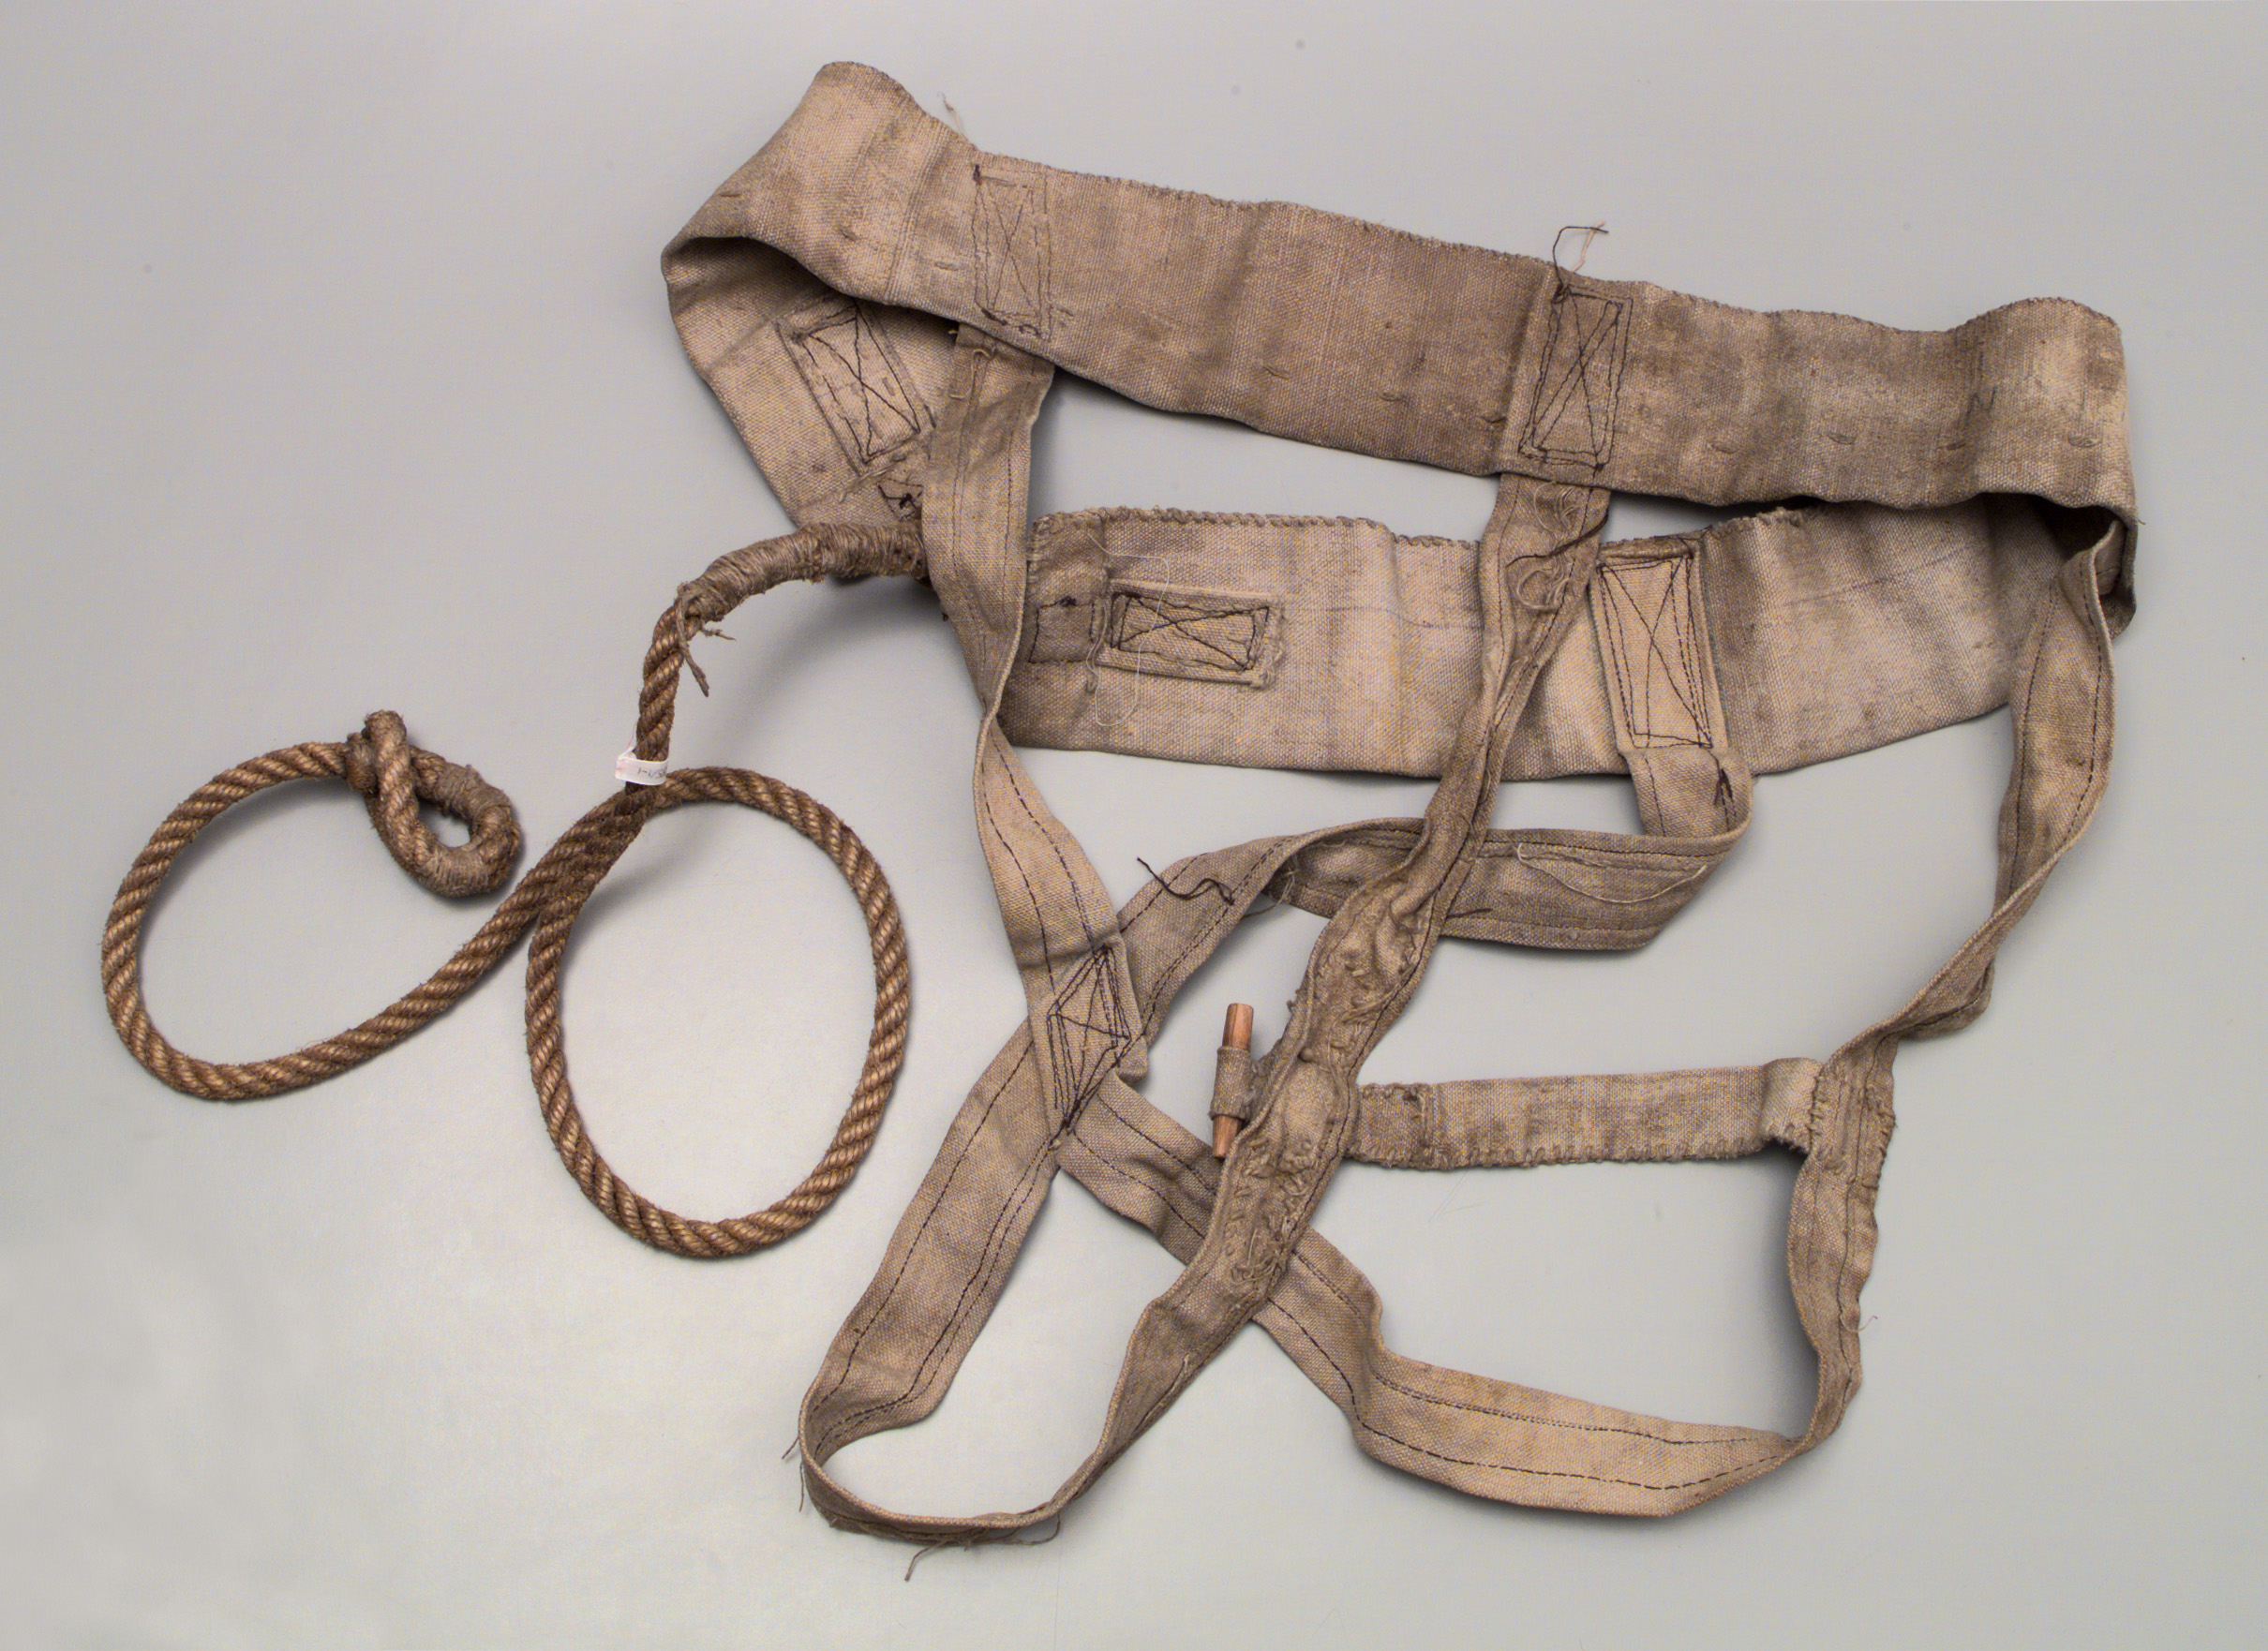 Safety harness made by Charles Laseron and used during Mawson's Australasian Antarctic Expedition.